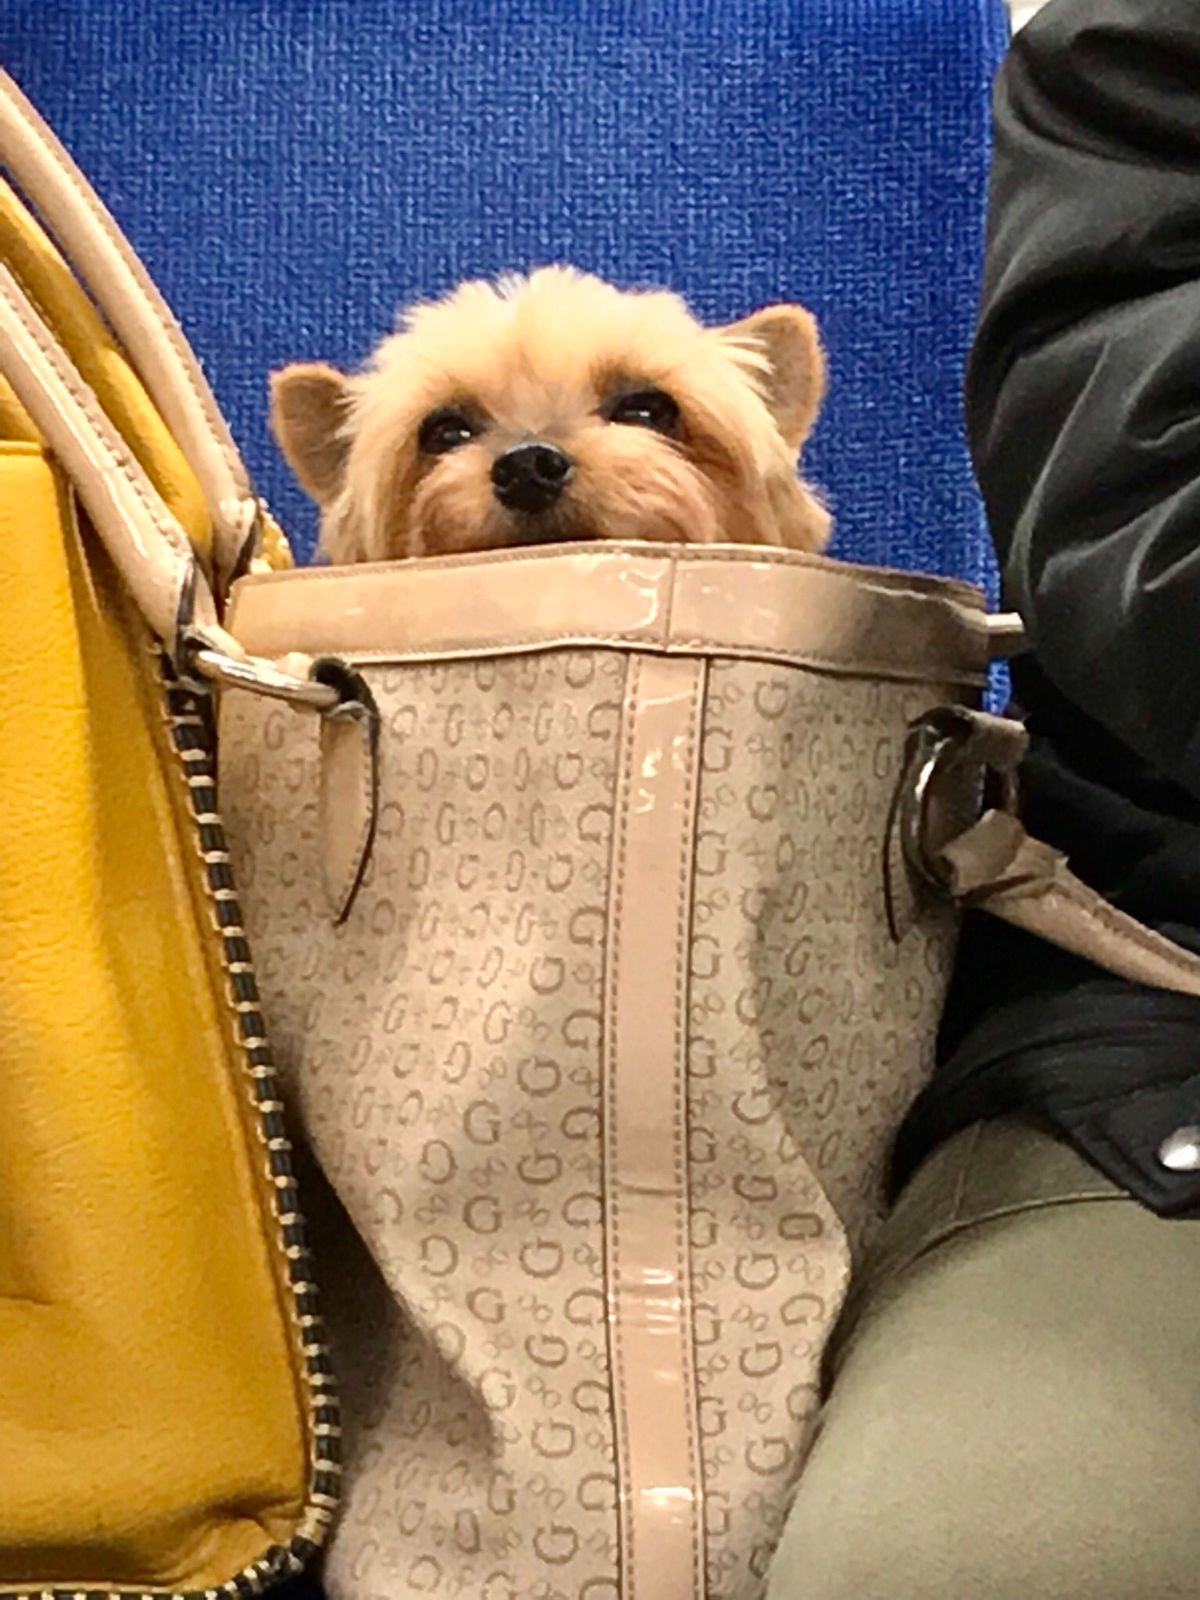 small fluffy brown dog inside a brown handbag on a blue train seat between a yellow bag and a person